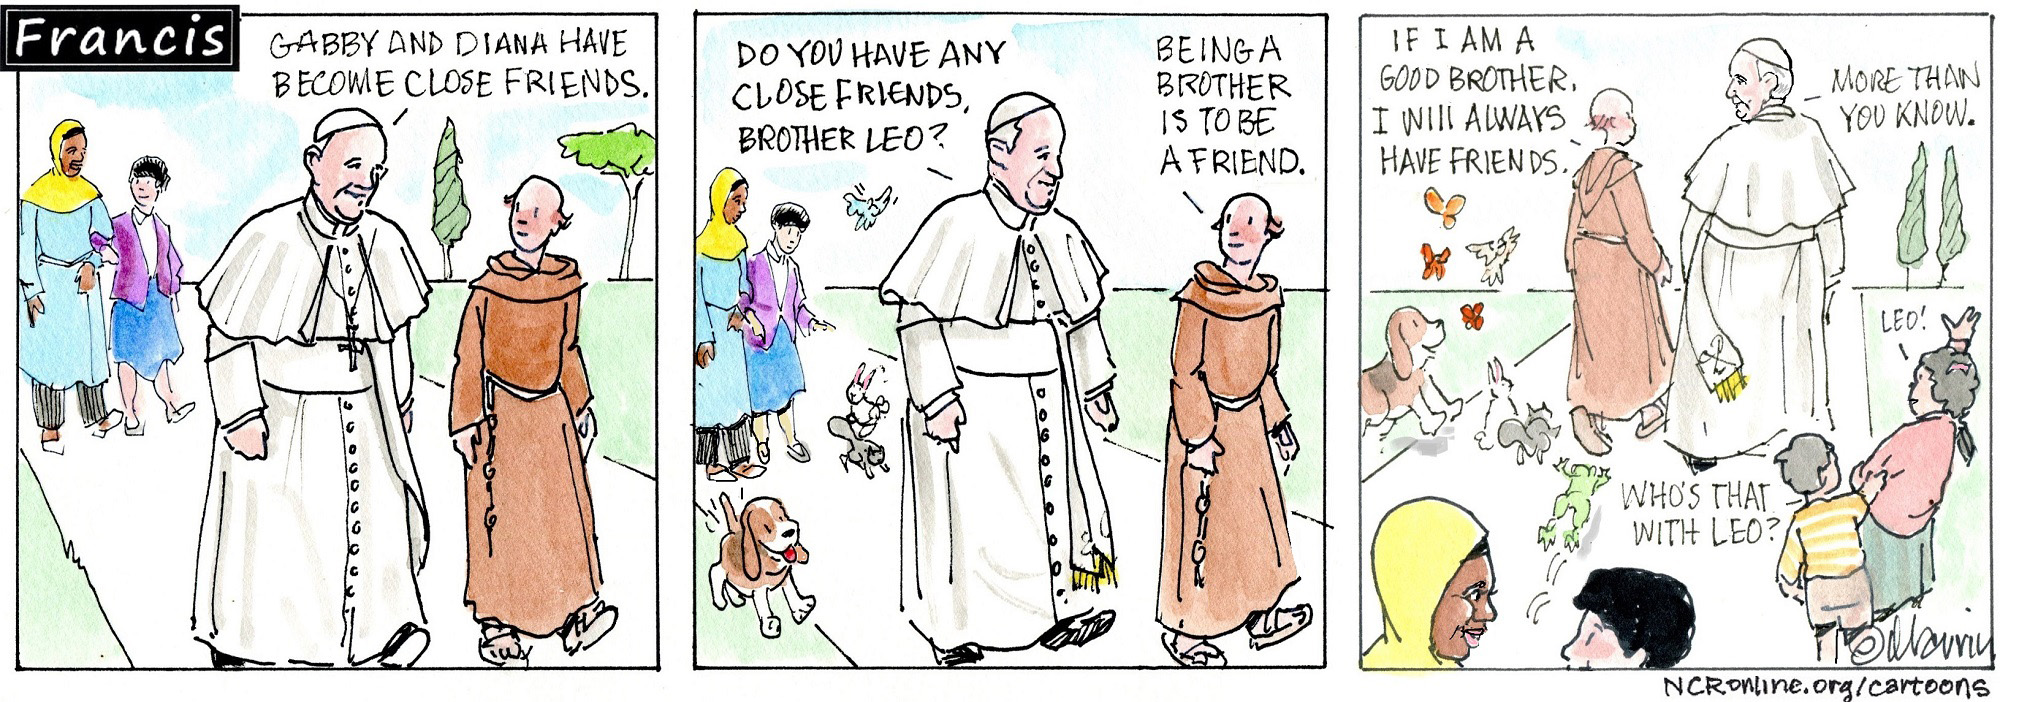 Francis, the comic strip: What does it mean to be a friend? Brother Leo has his answer.